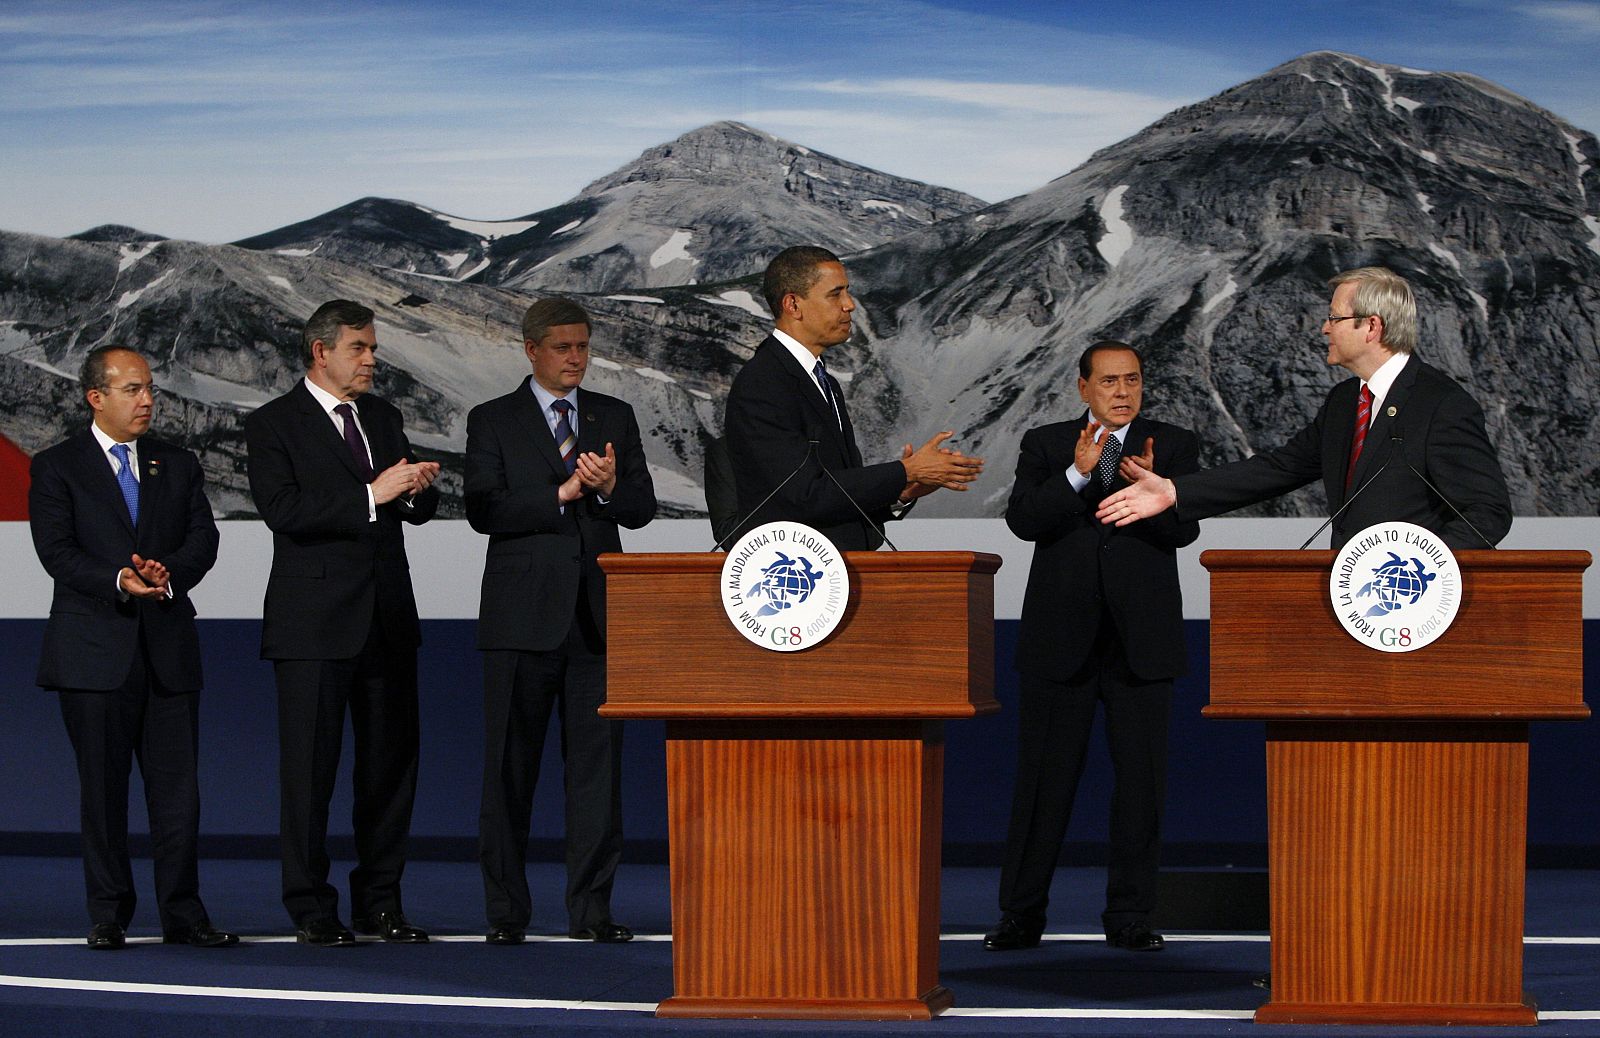 Australia's PM Rudd offers his hand to US President Obama as other leaders clap at the G8 summit in L'Aquila